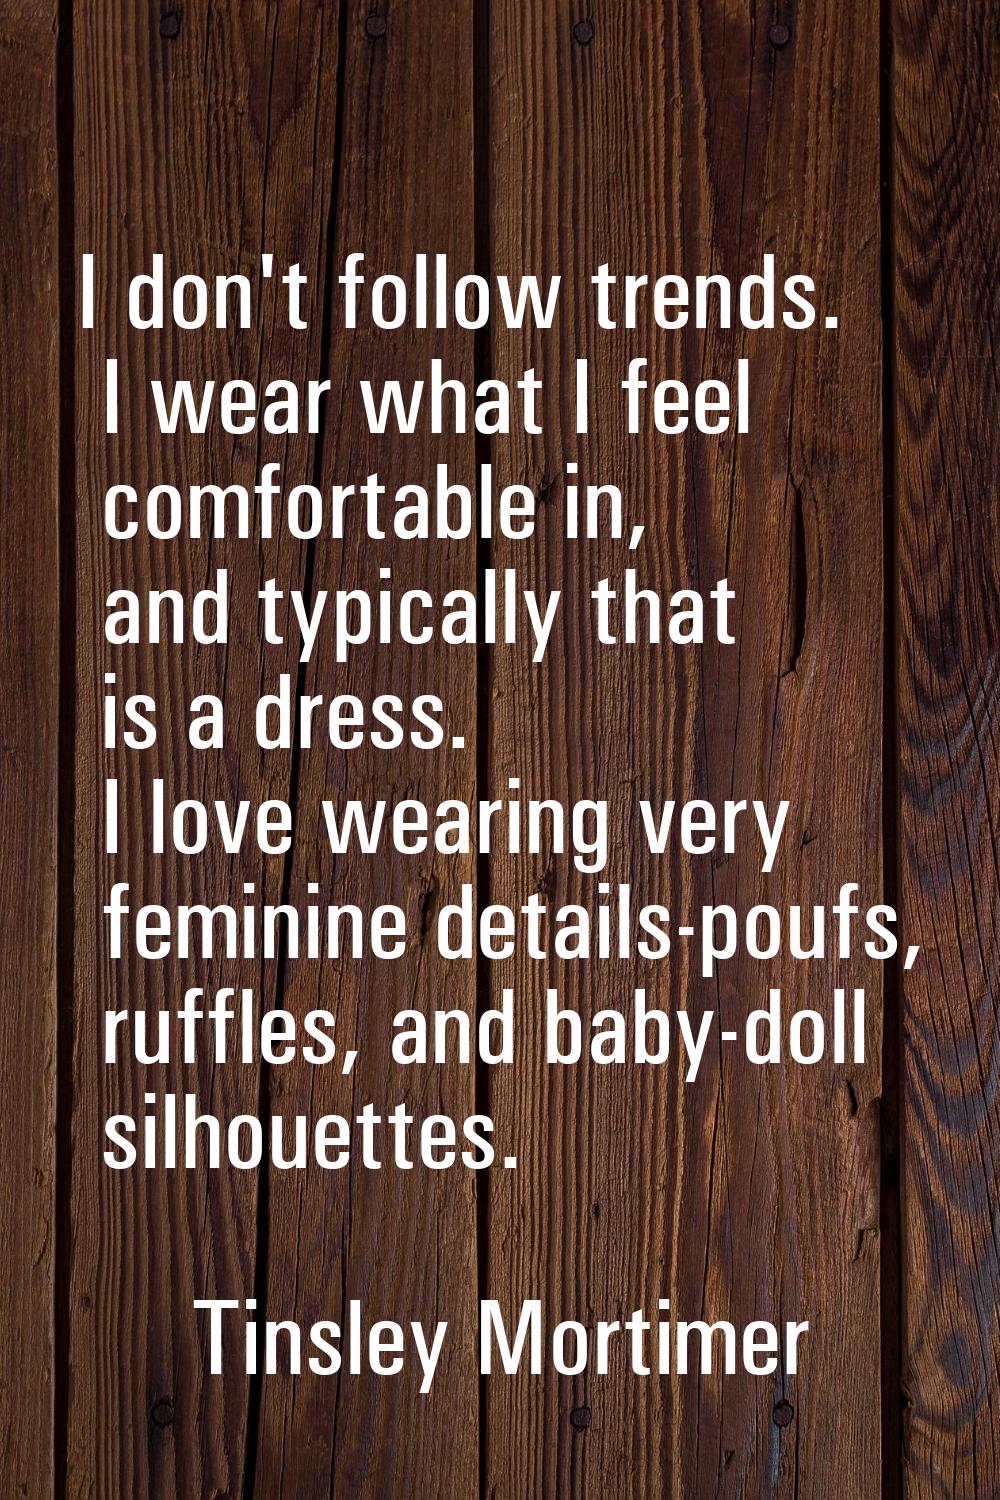 I don't follow trends. I wear what I feel comfortable in, and typically that is a dress. I love wea